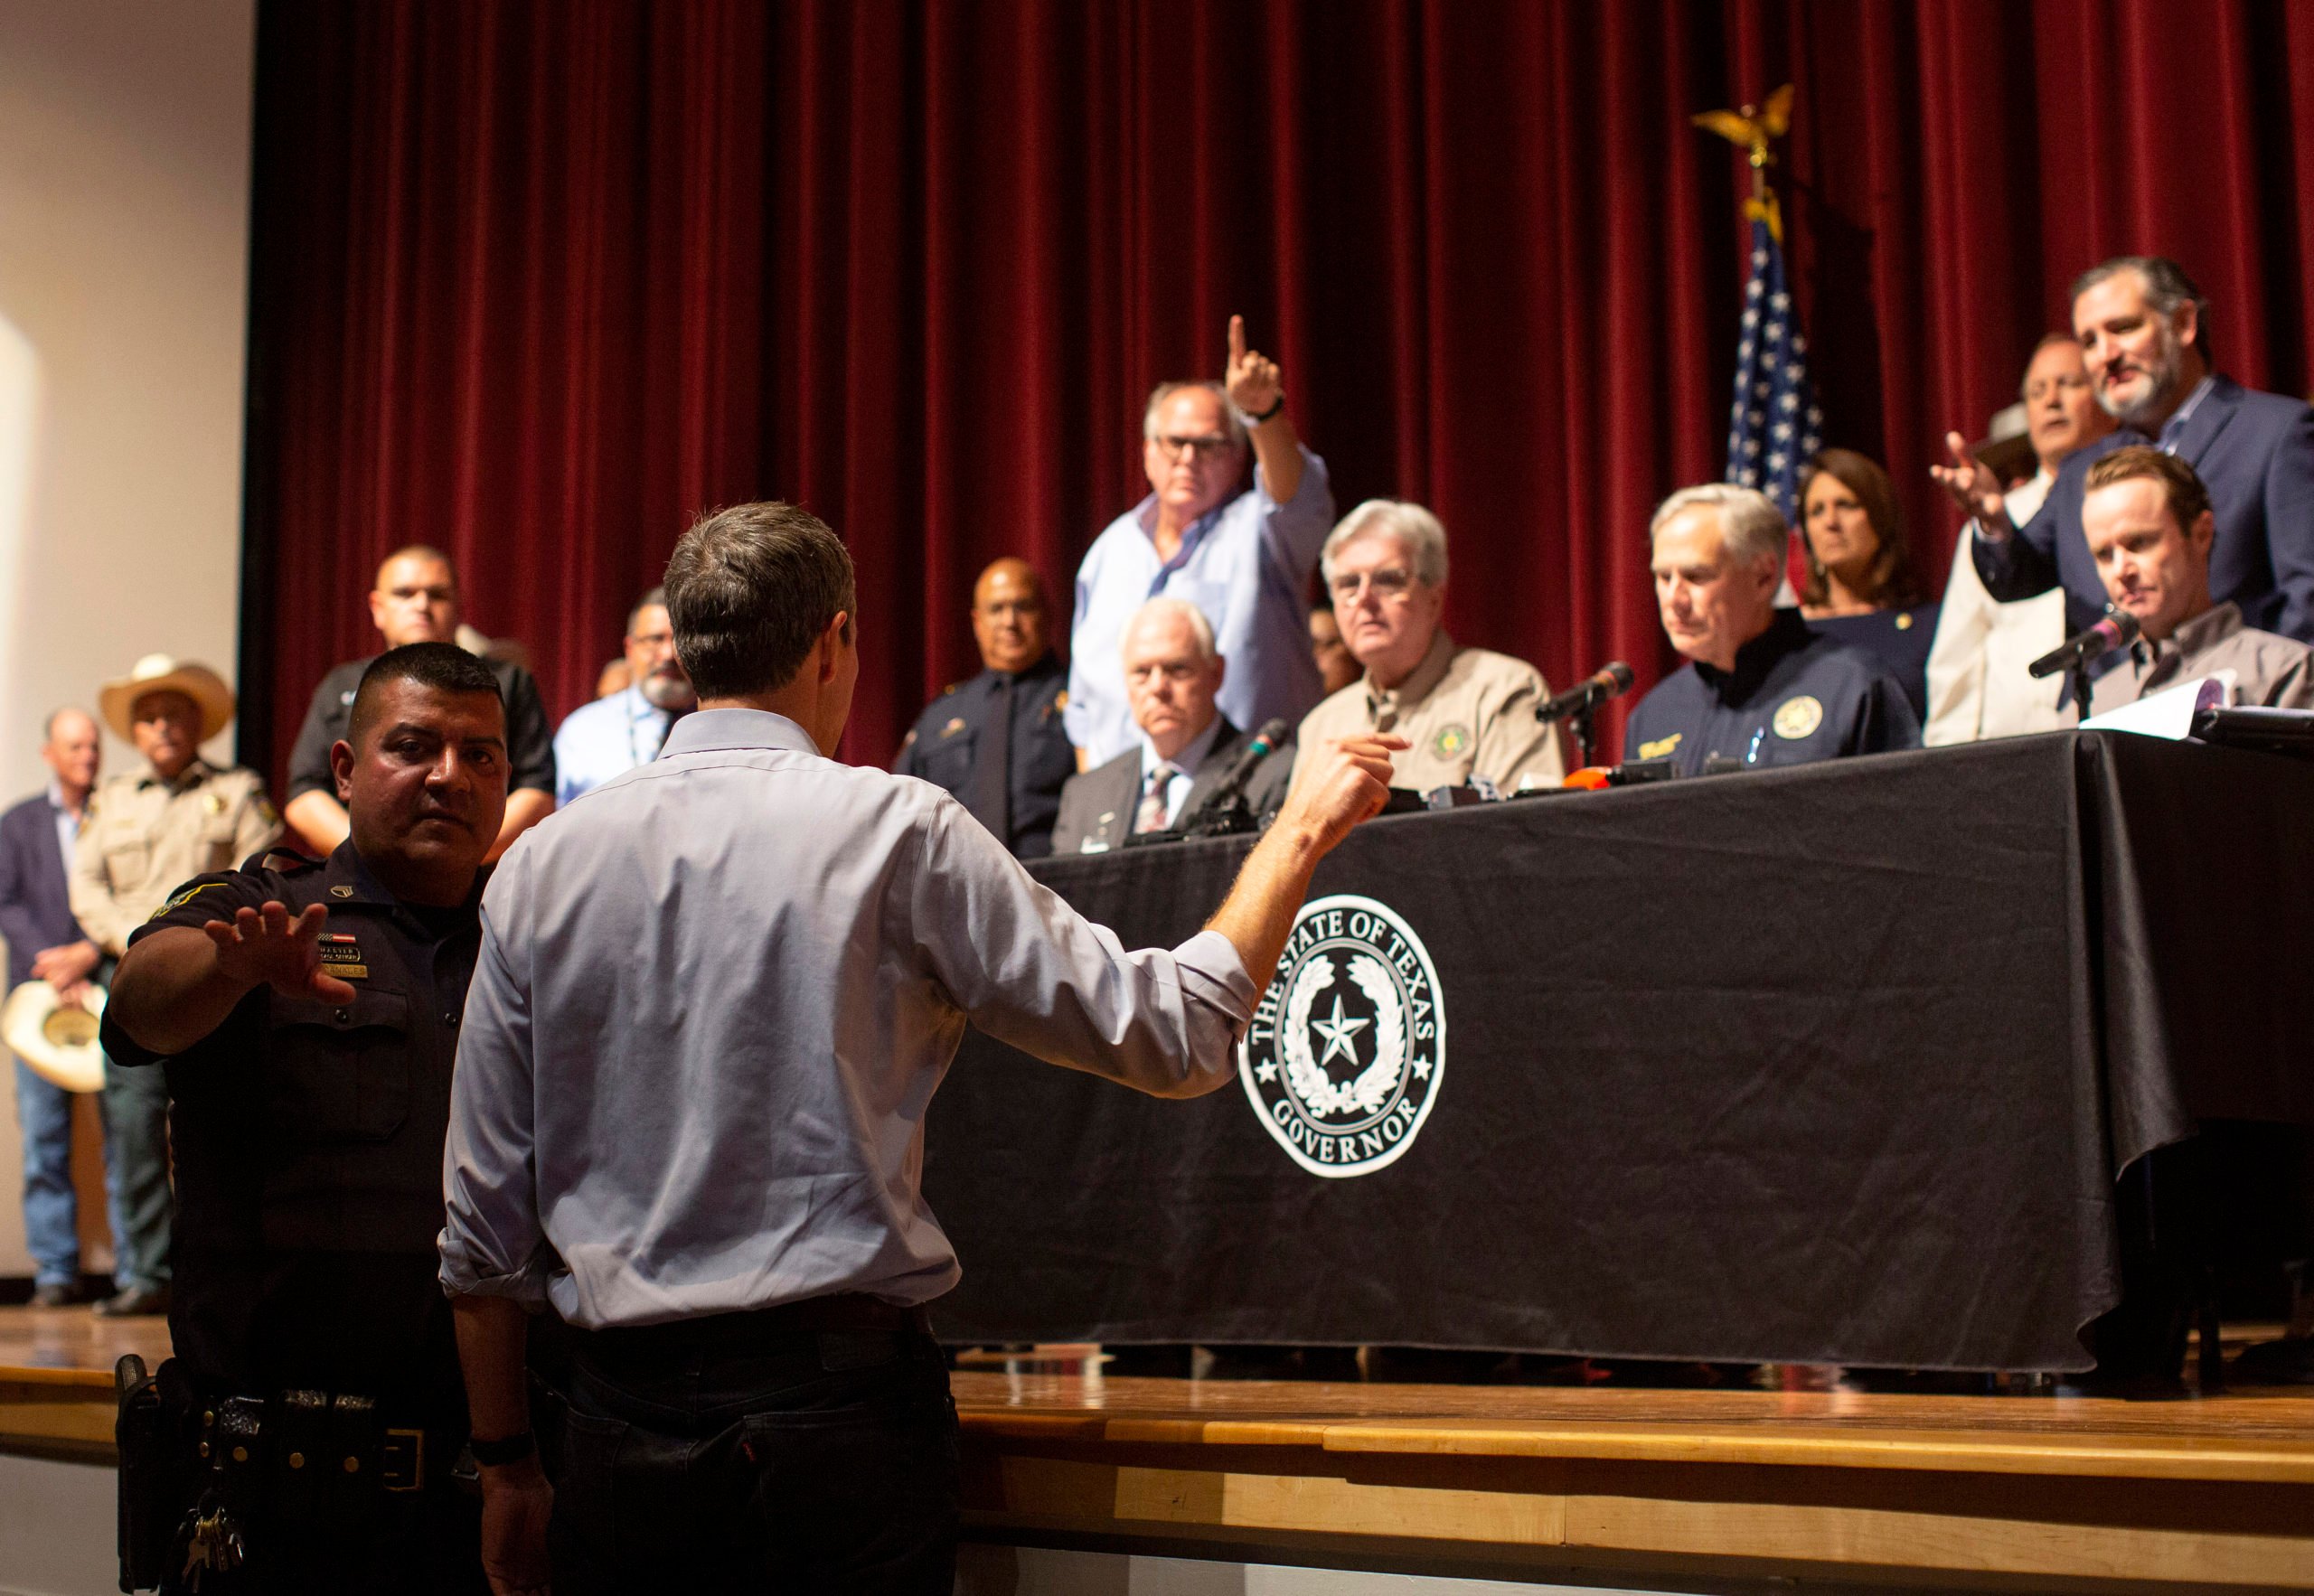 A police officer attempts to restrain Beto O'Rourke as he confronts Greg Abbott, who is seated on a dais. Behind Greg Abbott, the Uvalde mayor points angrily at O'Rourke.